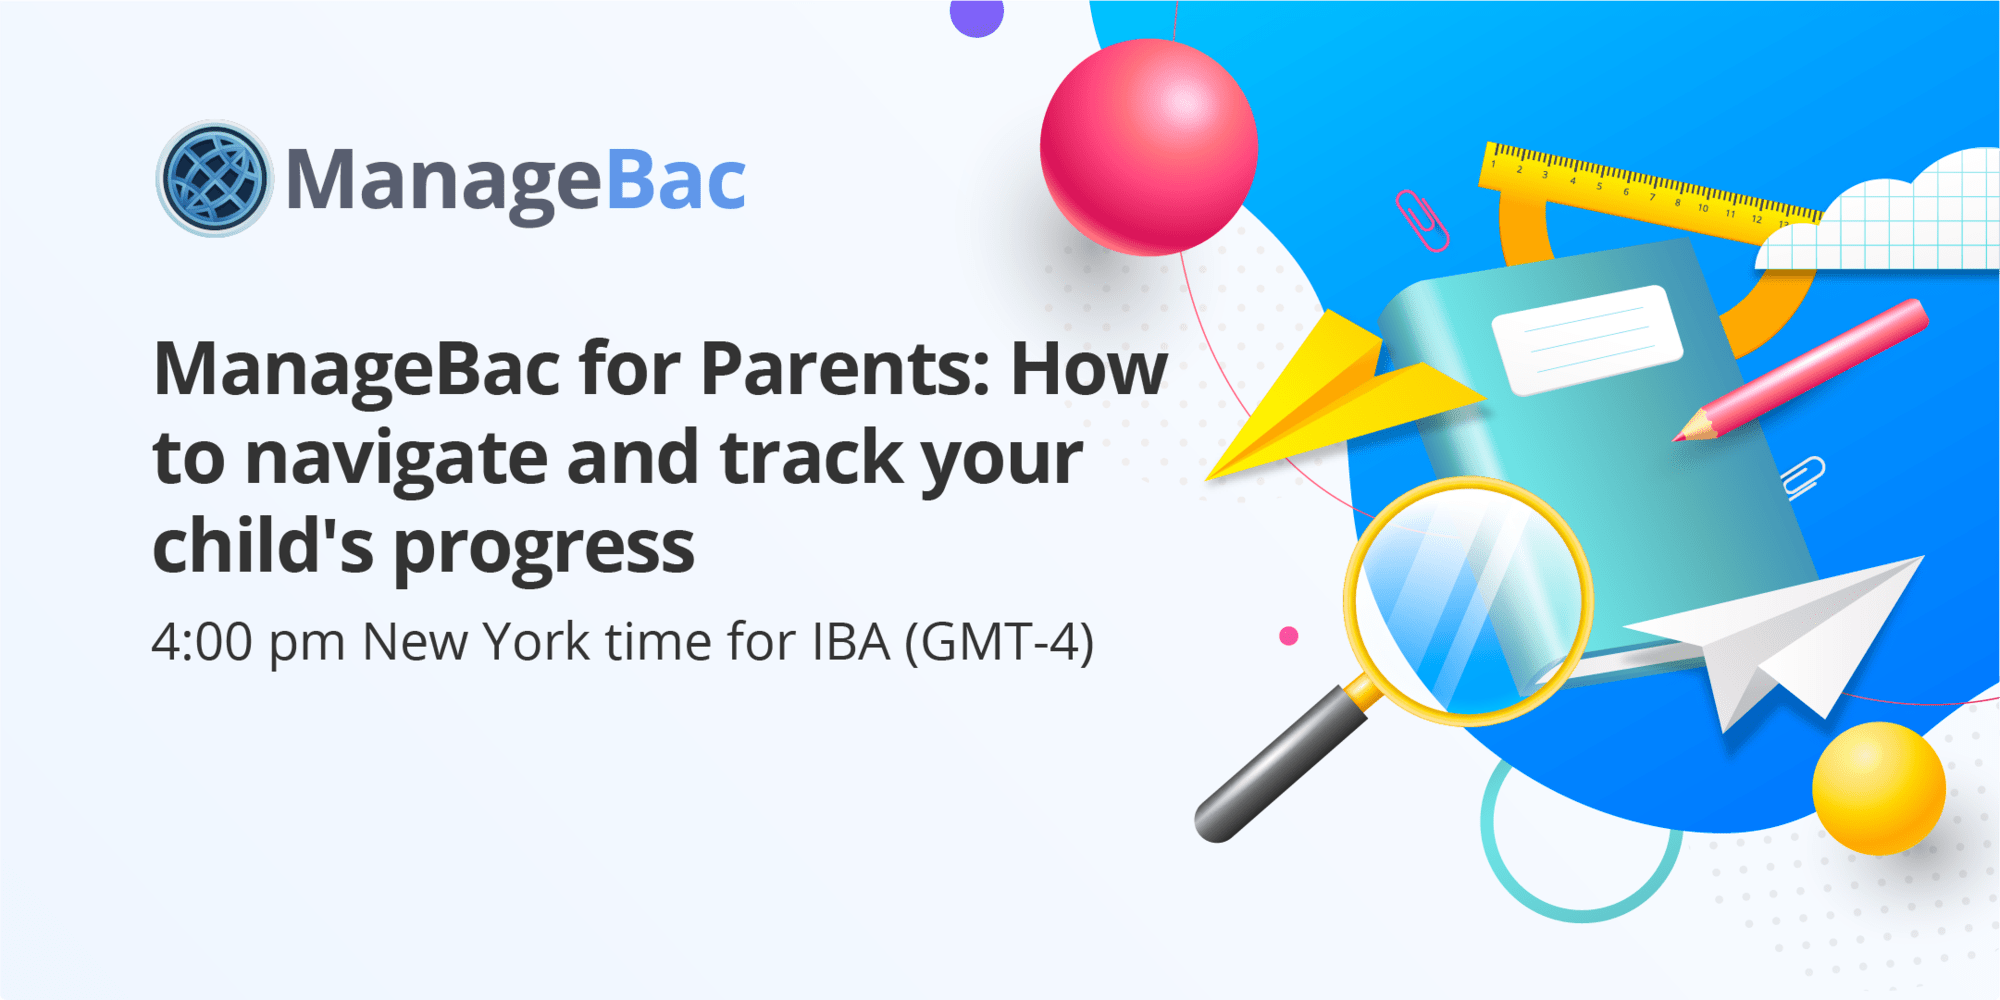 ManageBac for Parents: How to navigate and track your child's progress